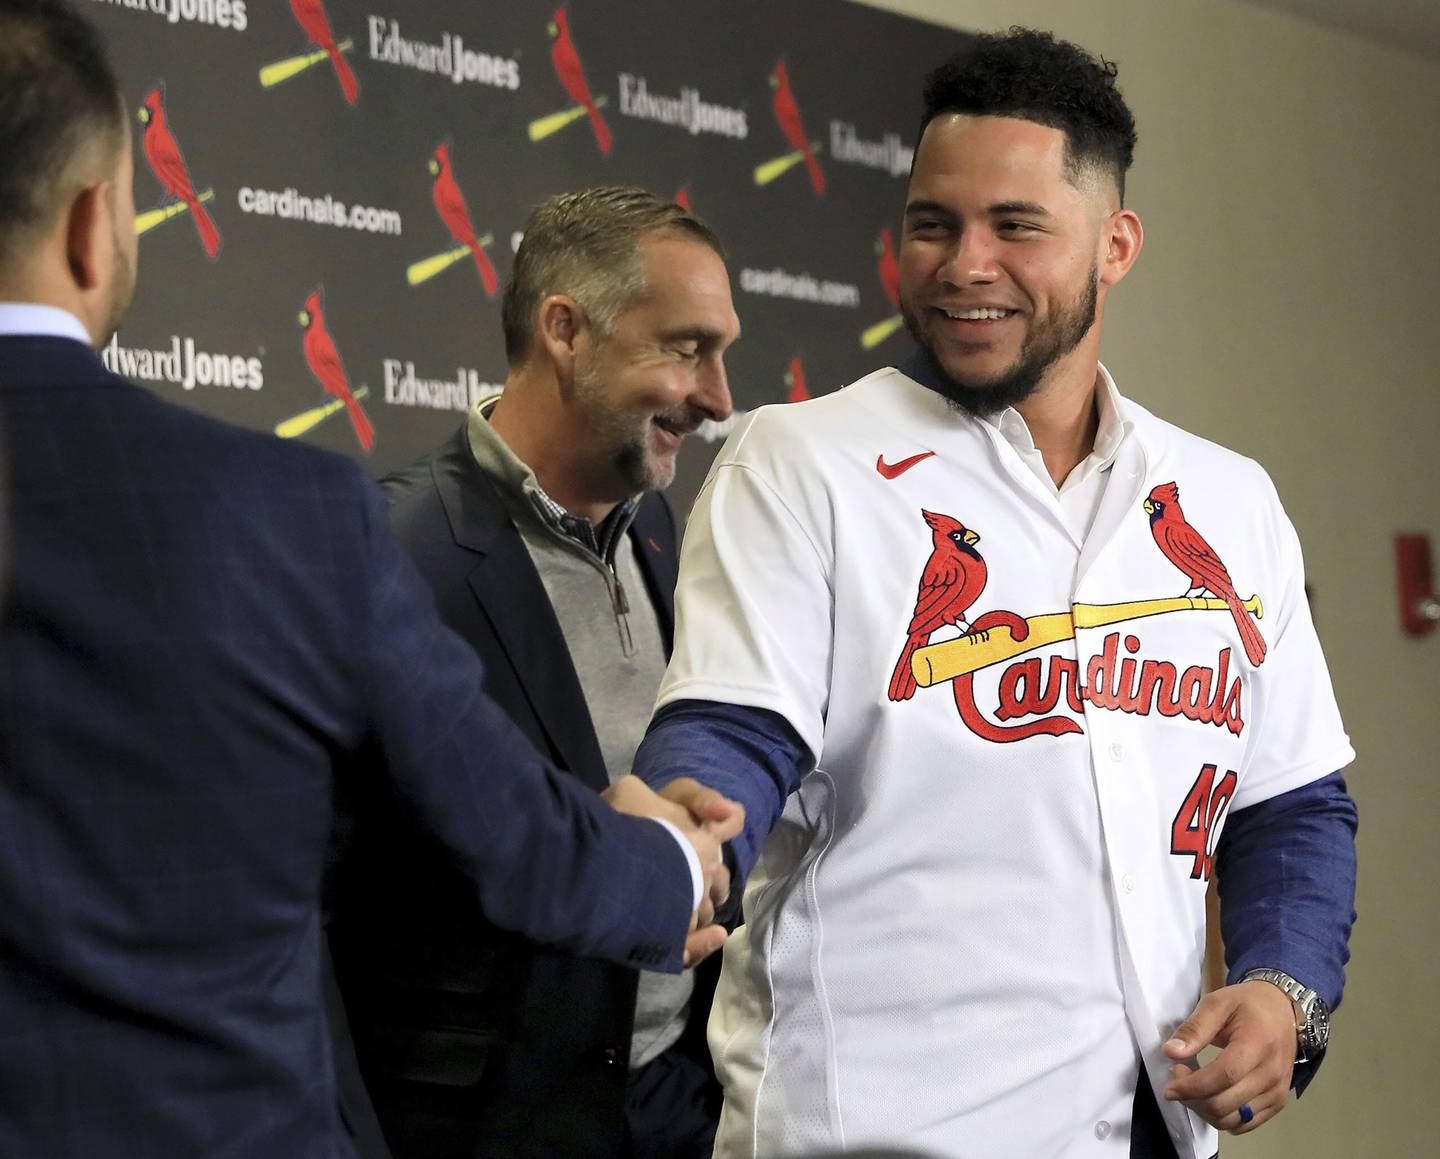 New Cardinals catcher Willson Contreras shakes hands with manager Oliver Marmol after a news conference Friday, Dec. 9, 2022, at Busch Stadium in St. Louis.